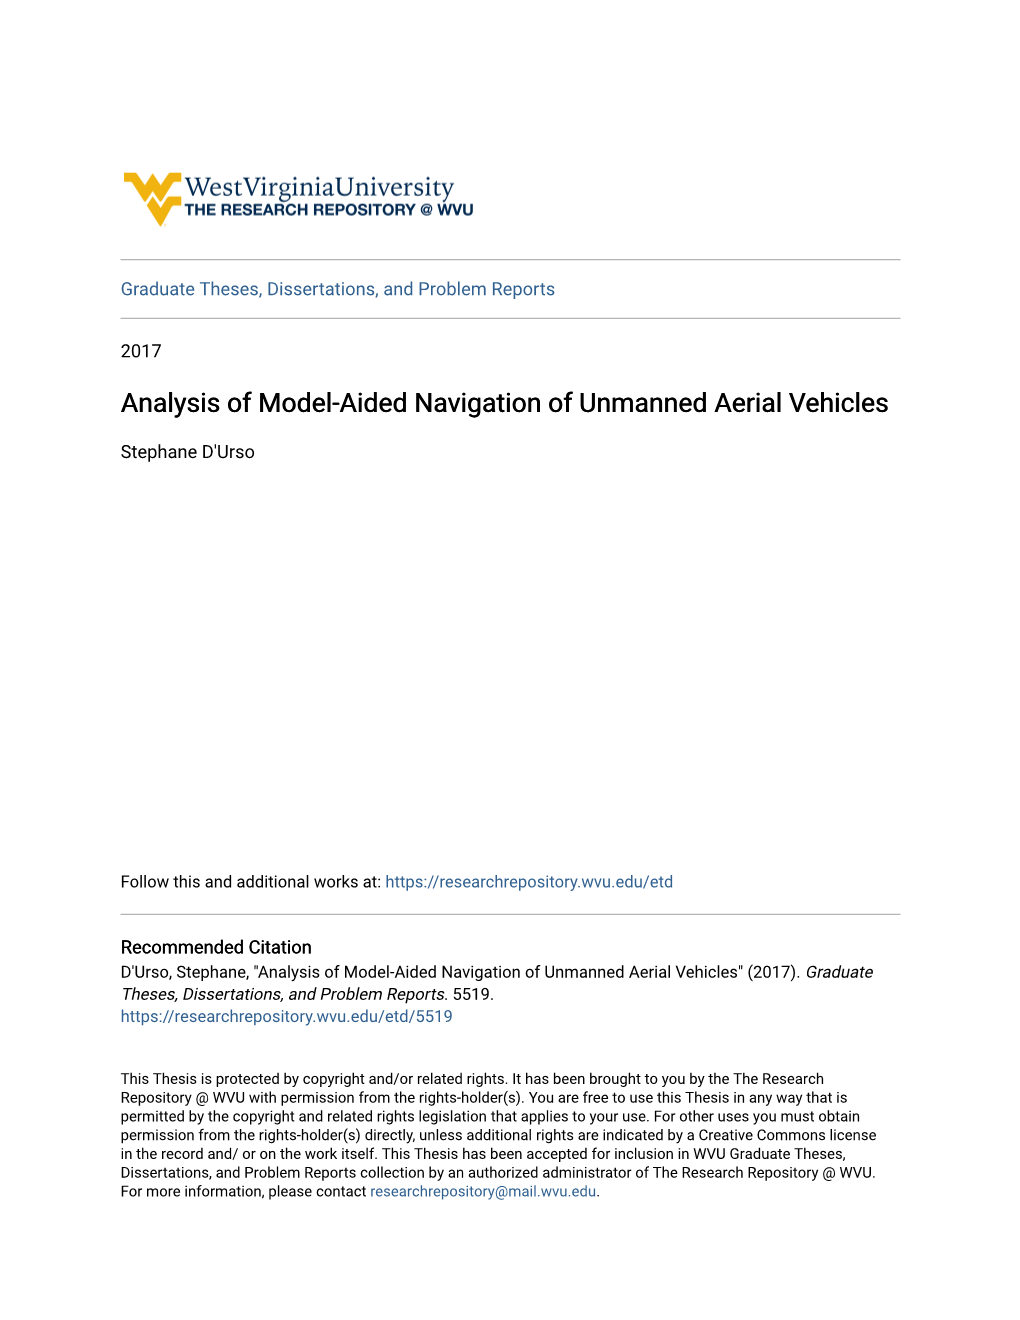 Analysis of Model-Aided Navigation of Unmanned Aerial Vehicles